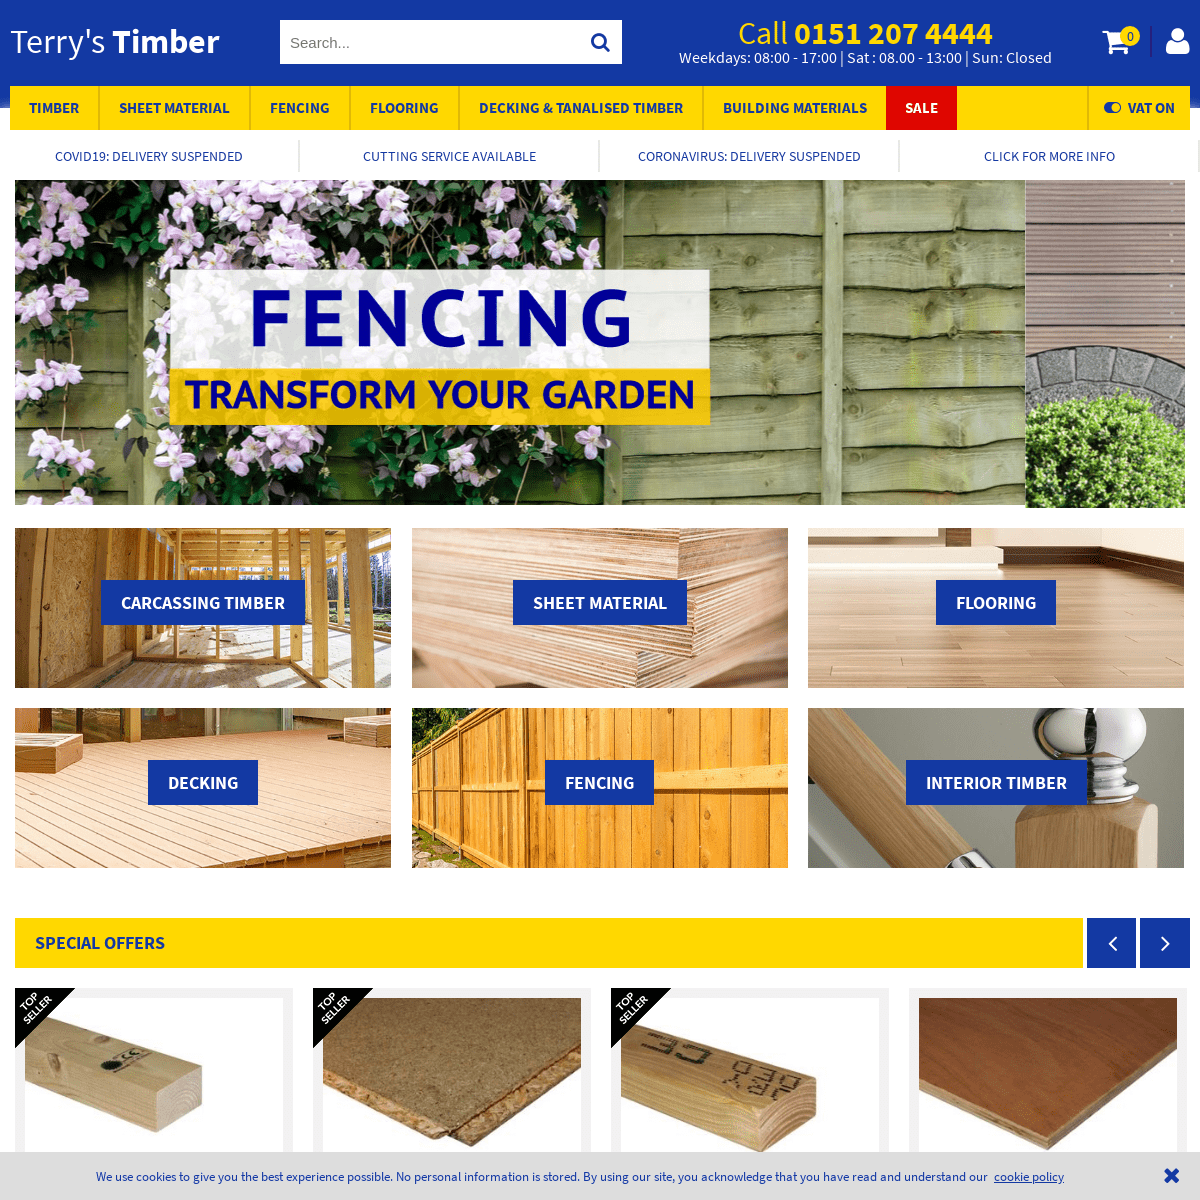 A complete backup of terrystimber.co.uk